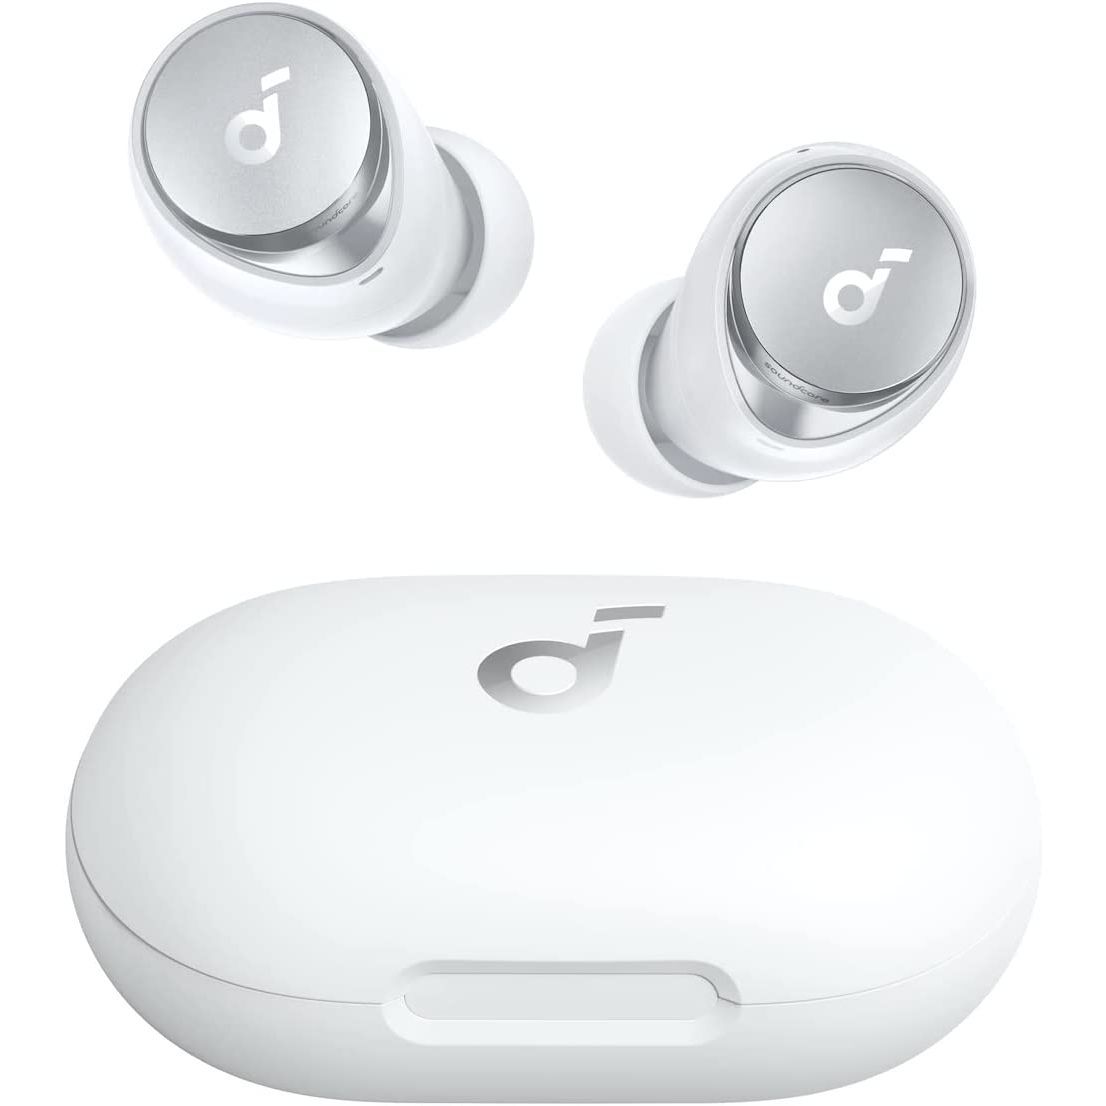 Anker's impressive ANC wireless earbuds are a no-brainer at 50% off